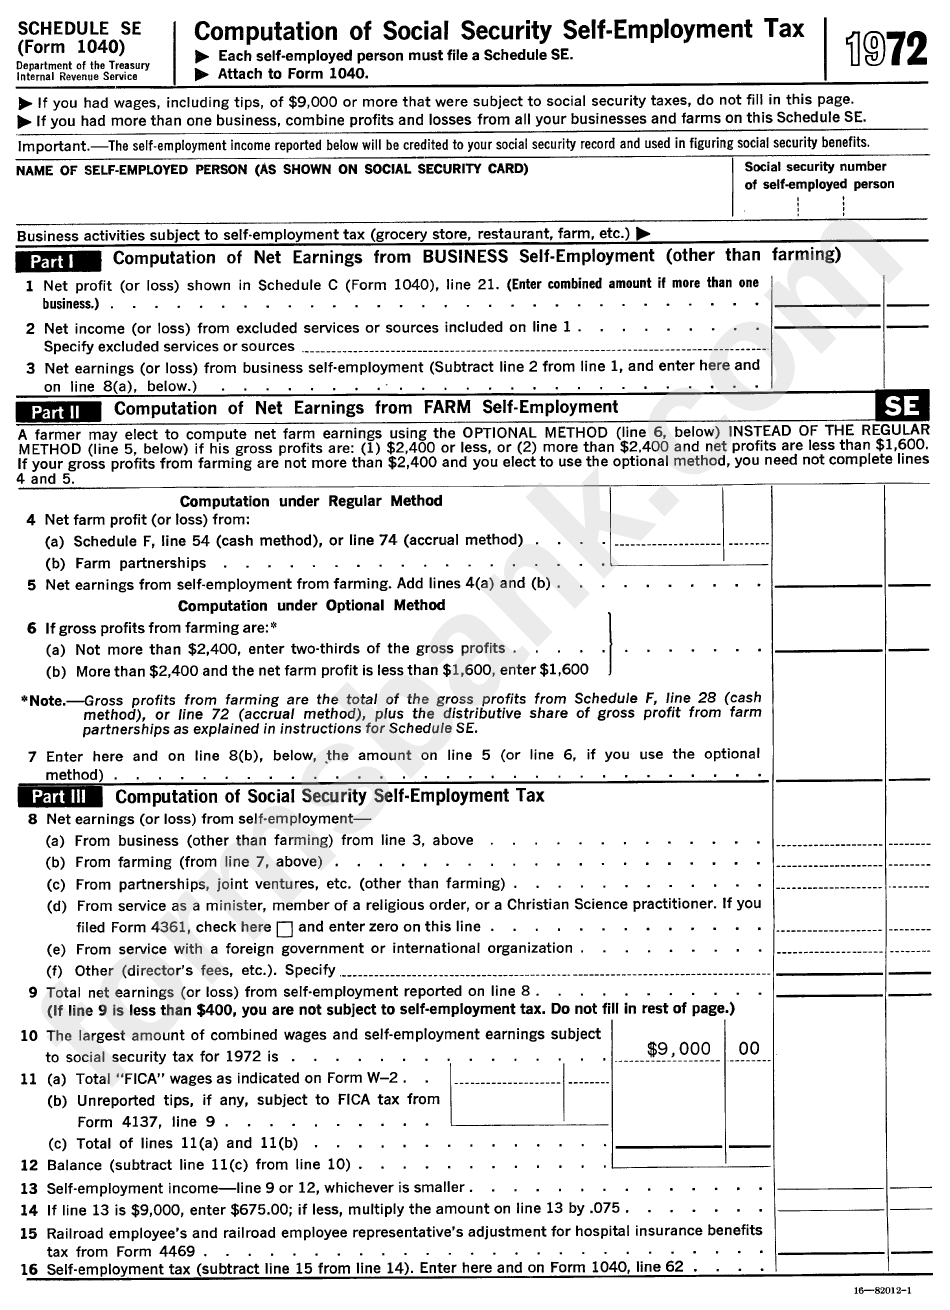 schedule-se-form-1040-computation-of-social-security-self-employment-tax-1972-printable